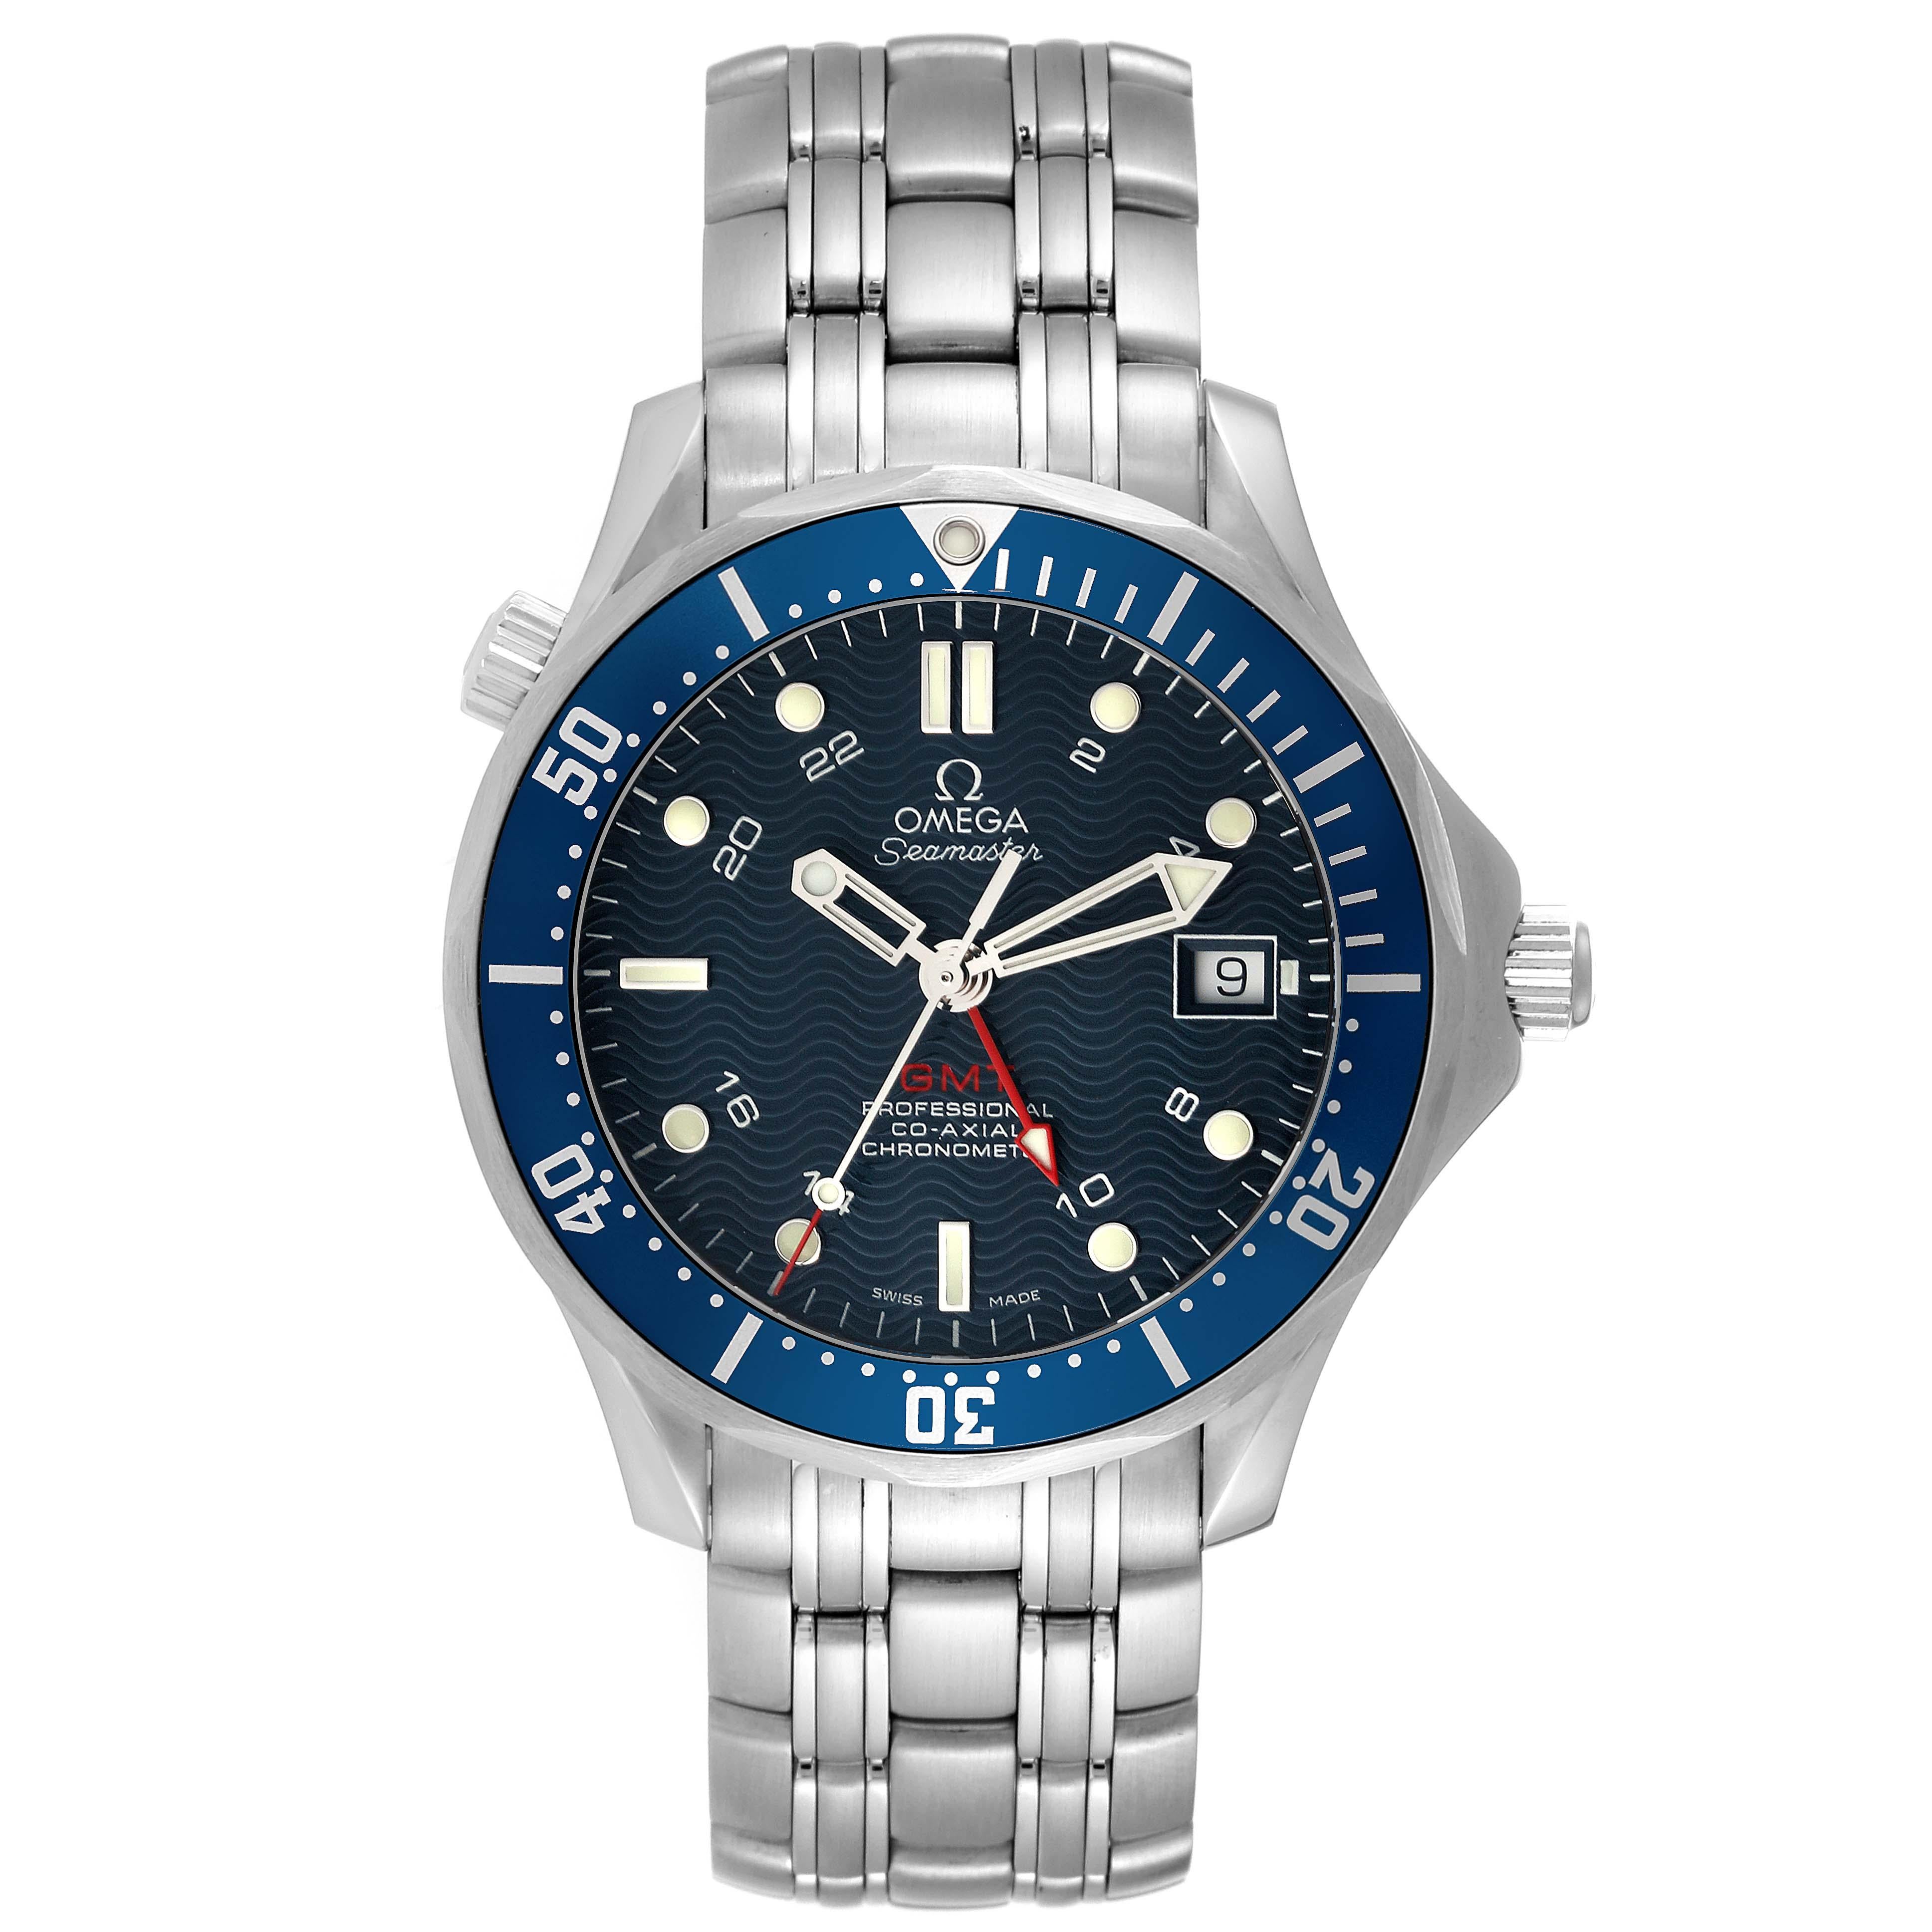 Omega Seamaster Diver 300M GMT Blue Dial Steel Mens Watch 2535.80.00 Box Card. Automatic self-winding movement. Caliber 2628. Stainless steel case 41.0 mm in diameter. Omega logo on the crown. Helium escape valve at 10 o'clock. Transparent